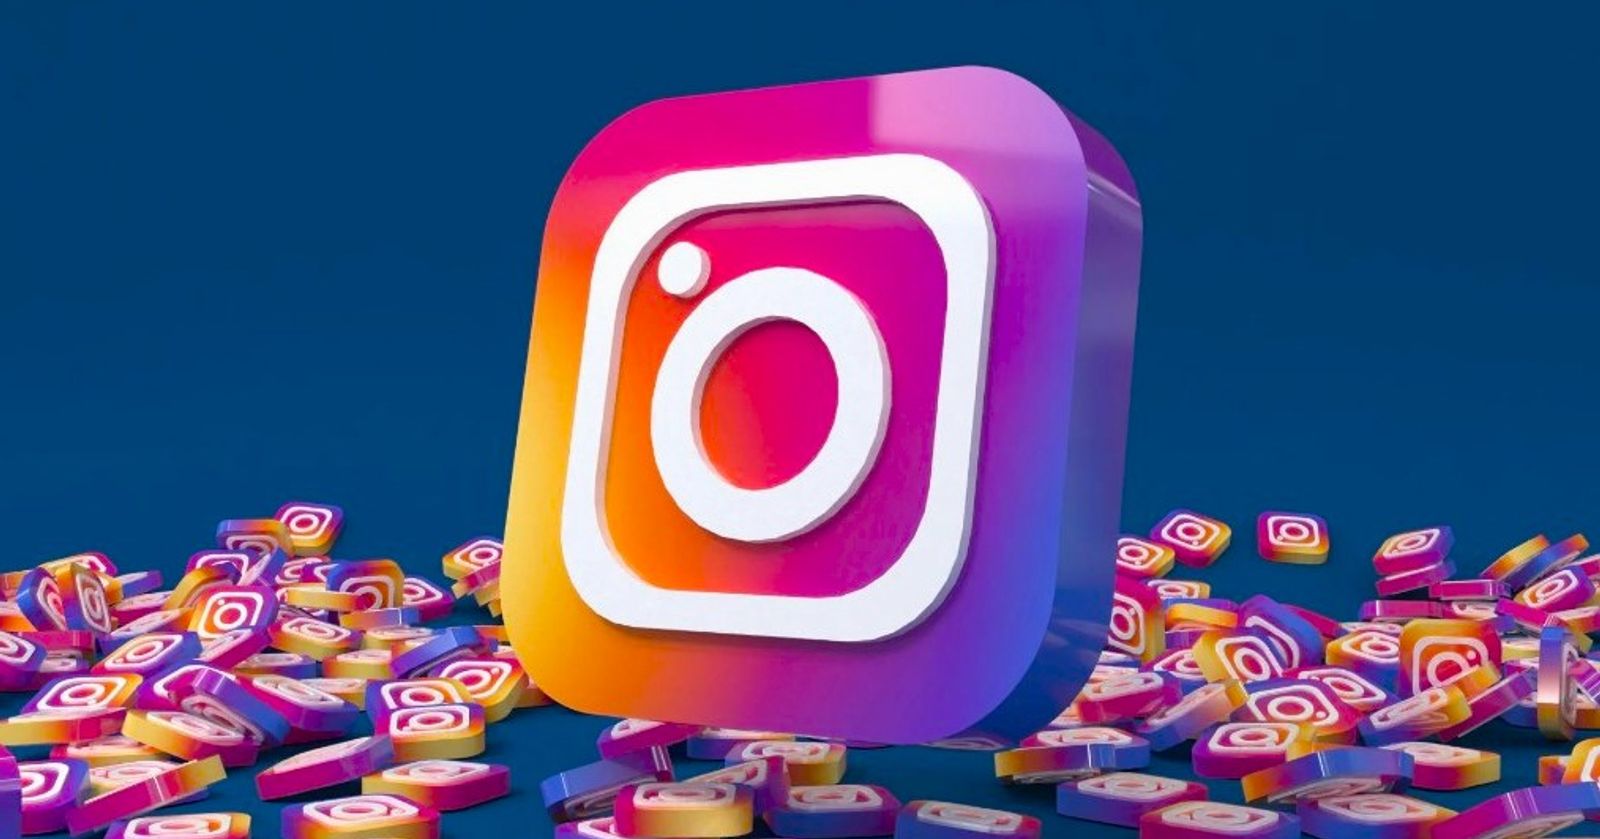 5 Easy Ways to Fix Instagram Not Sharing to Facebook - Guiding Tech